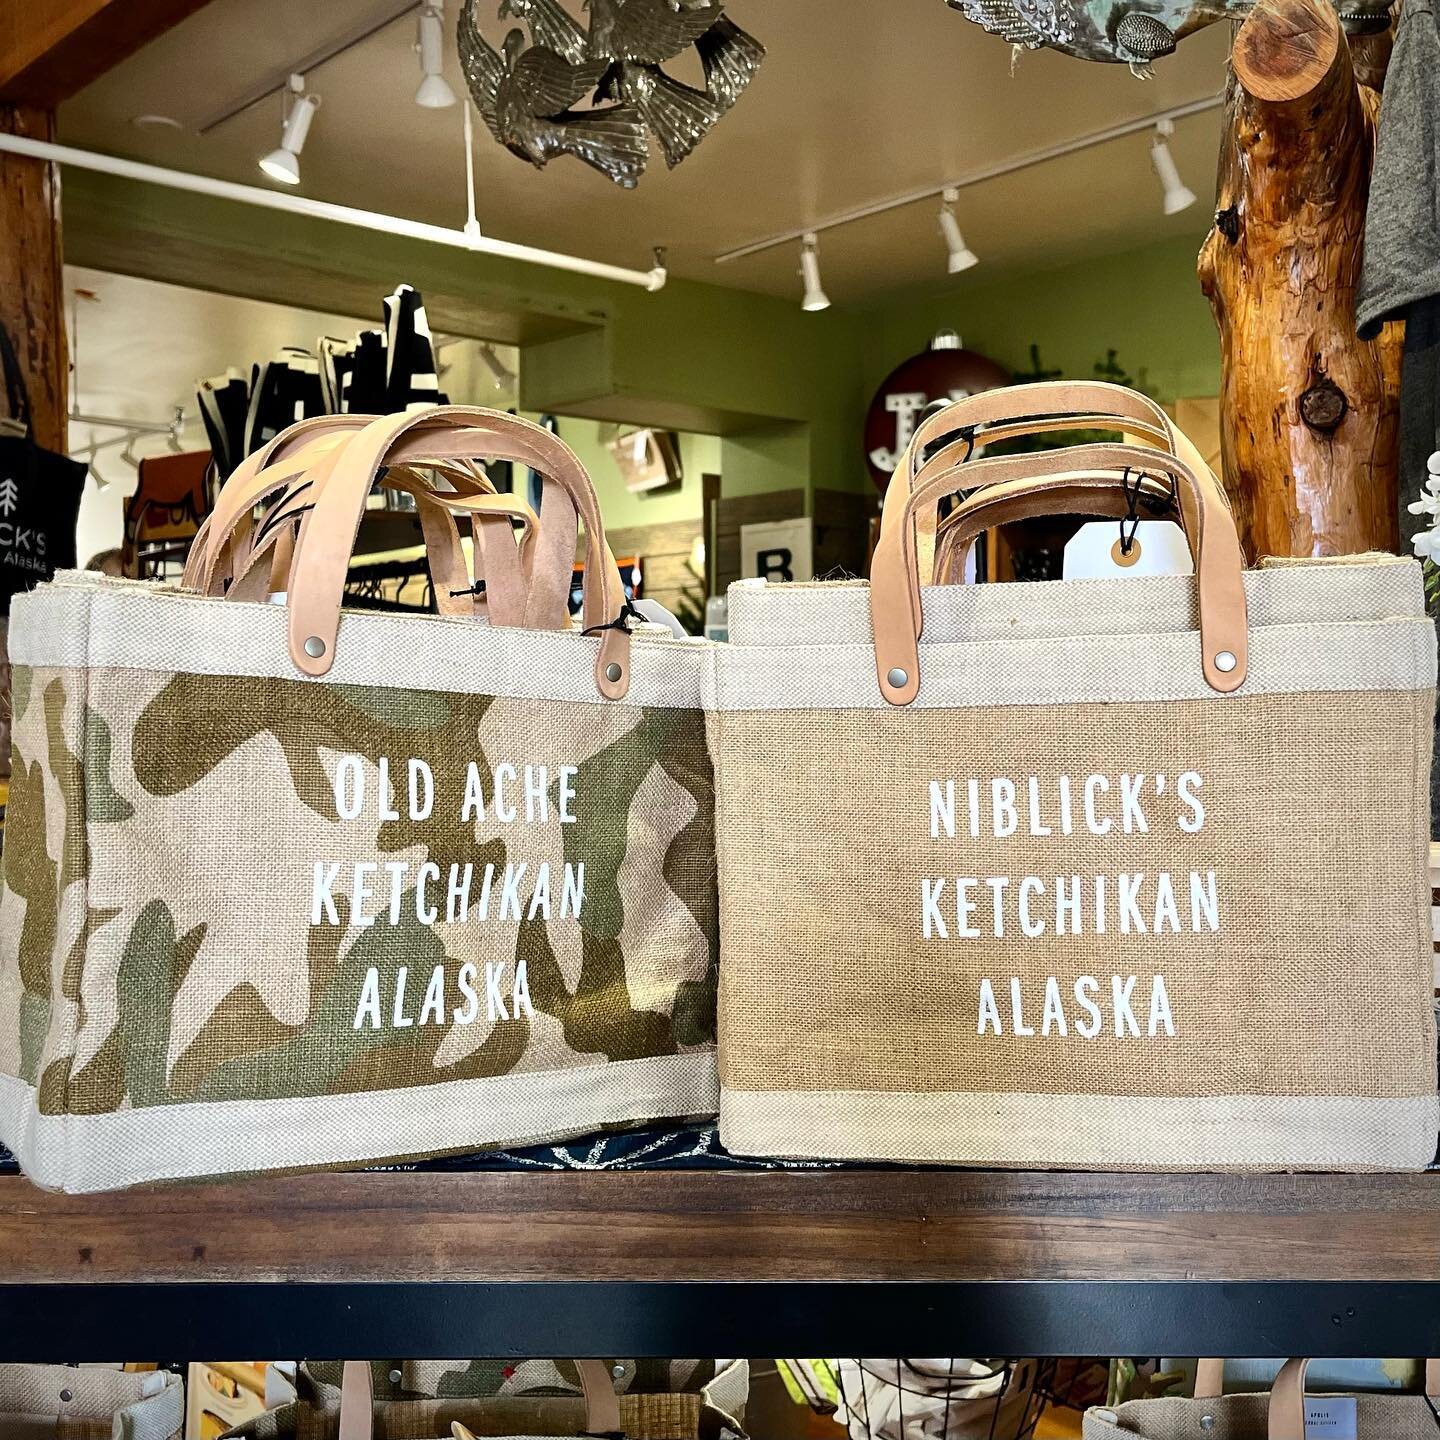 New bag alert!! These burlap bags are made to last you YEARS and are waterproof, perfect for our lovely Ketchikan weather. They are also available at @old.ache.alaska

We are open 9-4 all week, and 9-3 over the weekend. 
#bags #new #ecofriendly #ketc